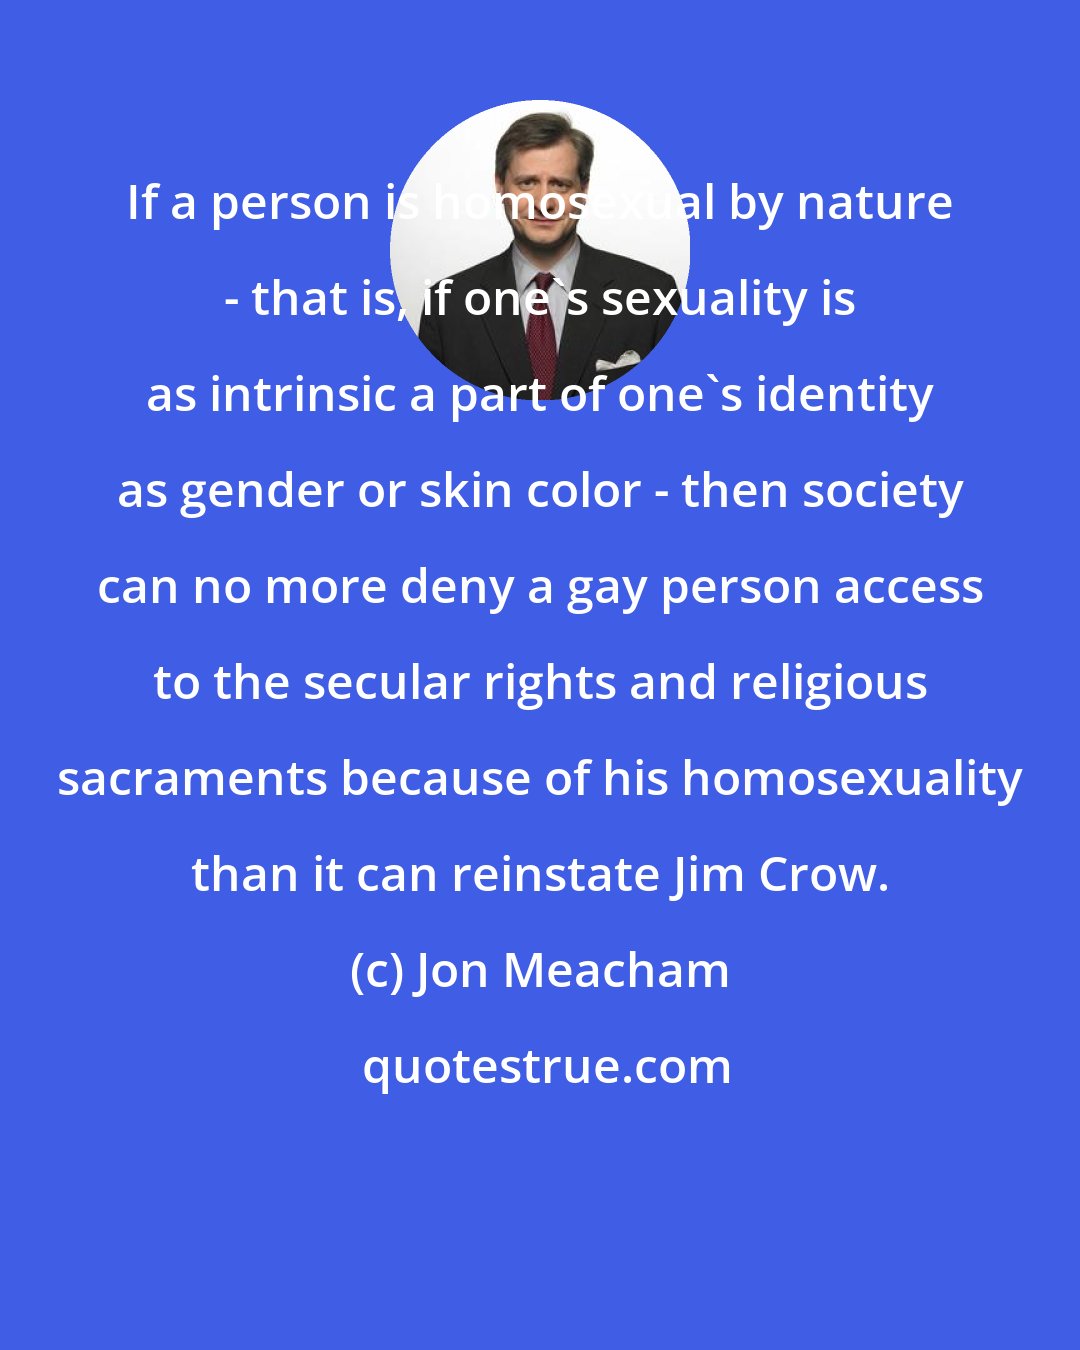 Jon Meacham: If a person is homosexual by nature - that is, if one's sexuality is as intrinsic a part of one's identity as gender or skin color - then society can no more deny a gay person access to the secular rights and religious sacraments because of his homosexuality than it can reinstate Jim Crow.